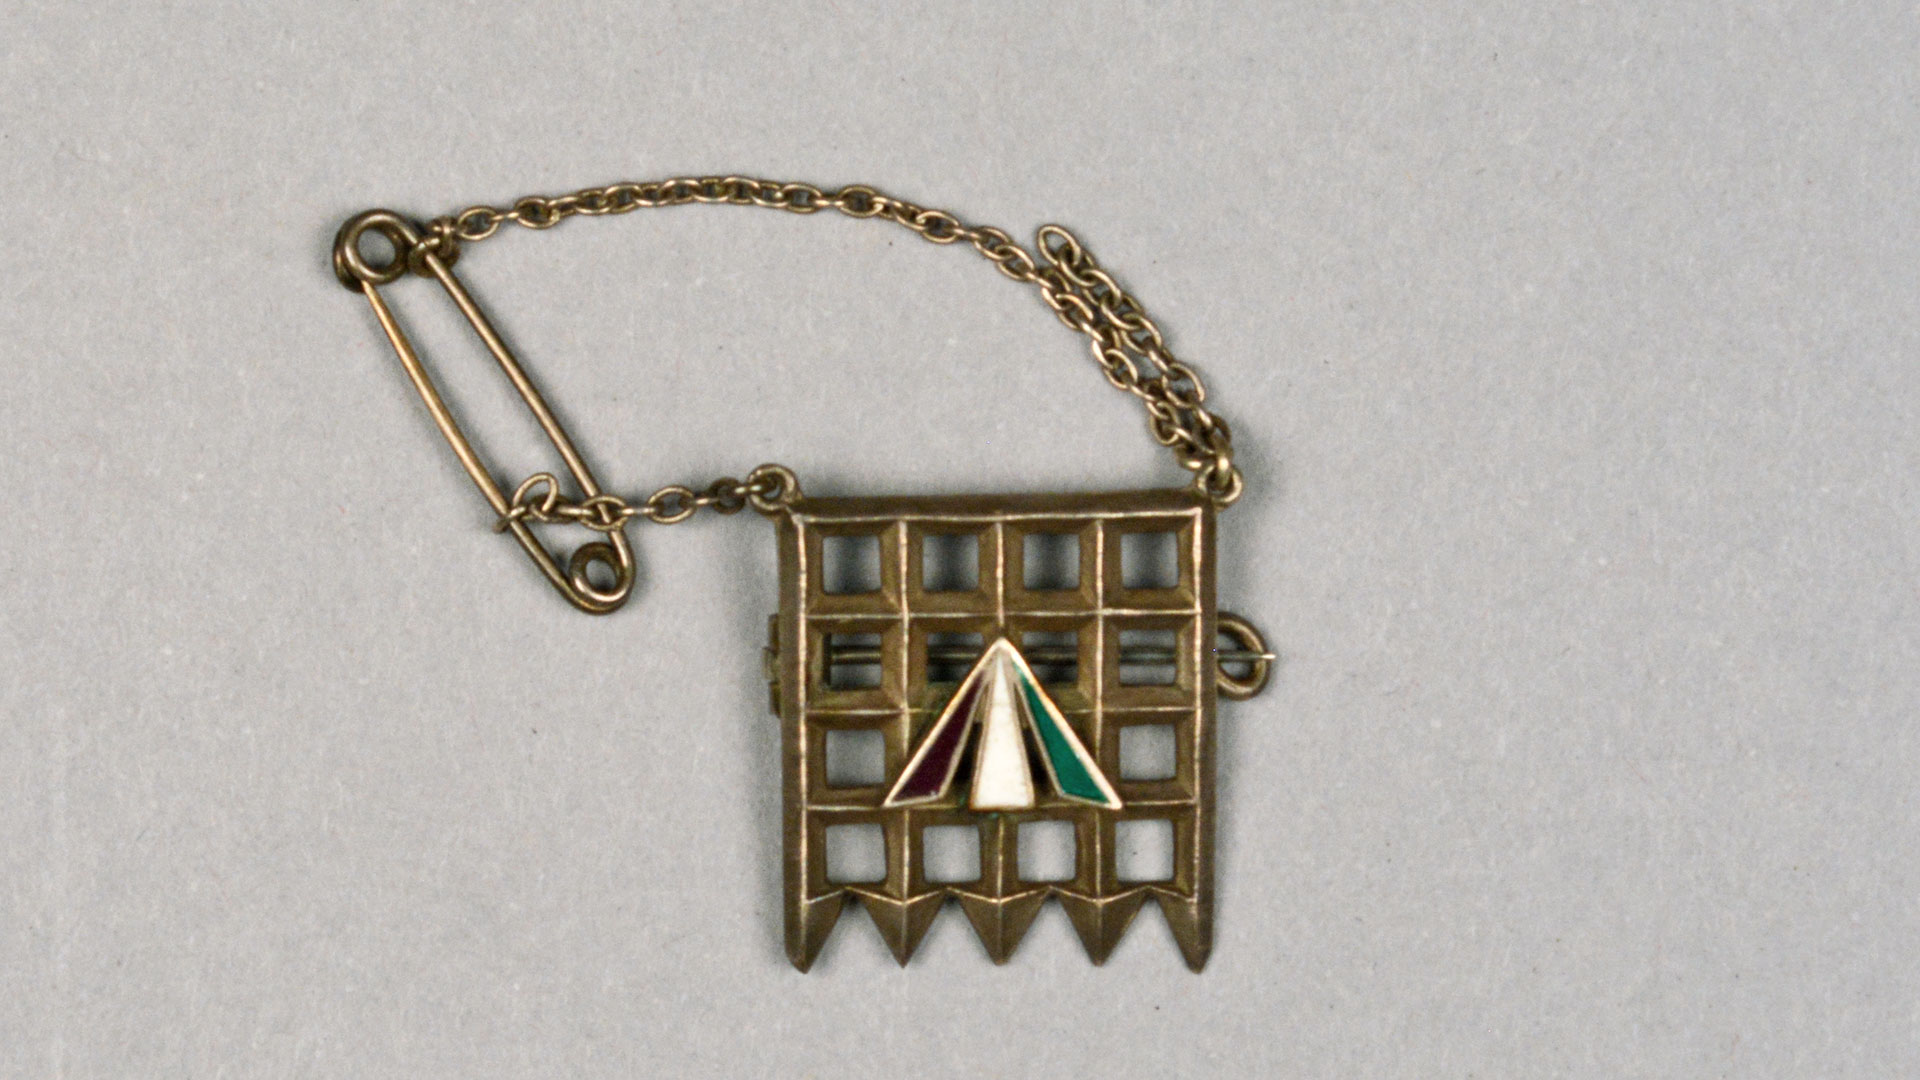 small brass pin with chain, grid design with a three triangle design overlaied in purple, white, and green